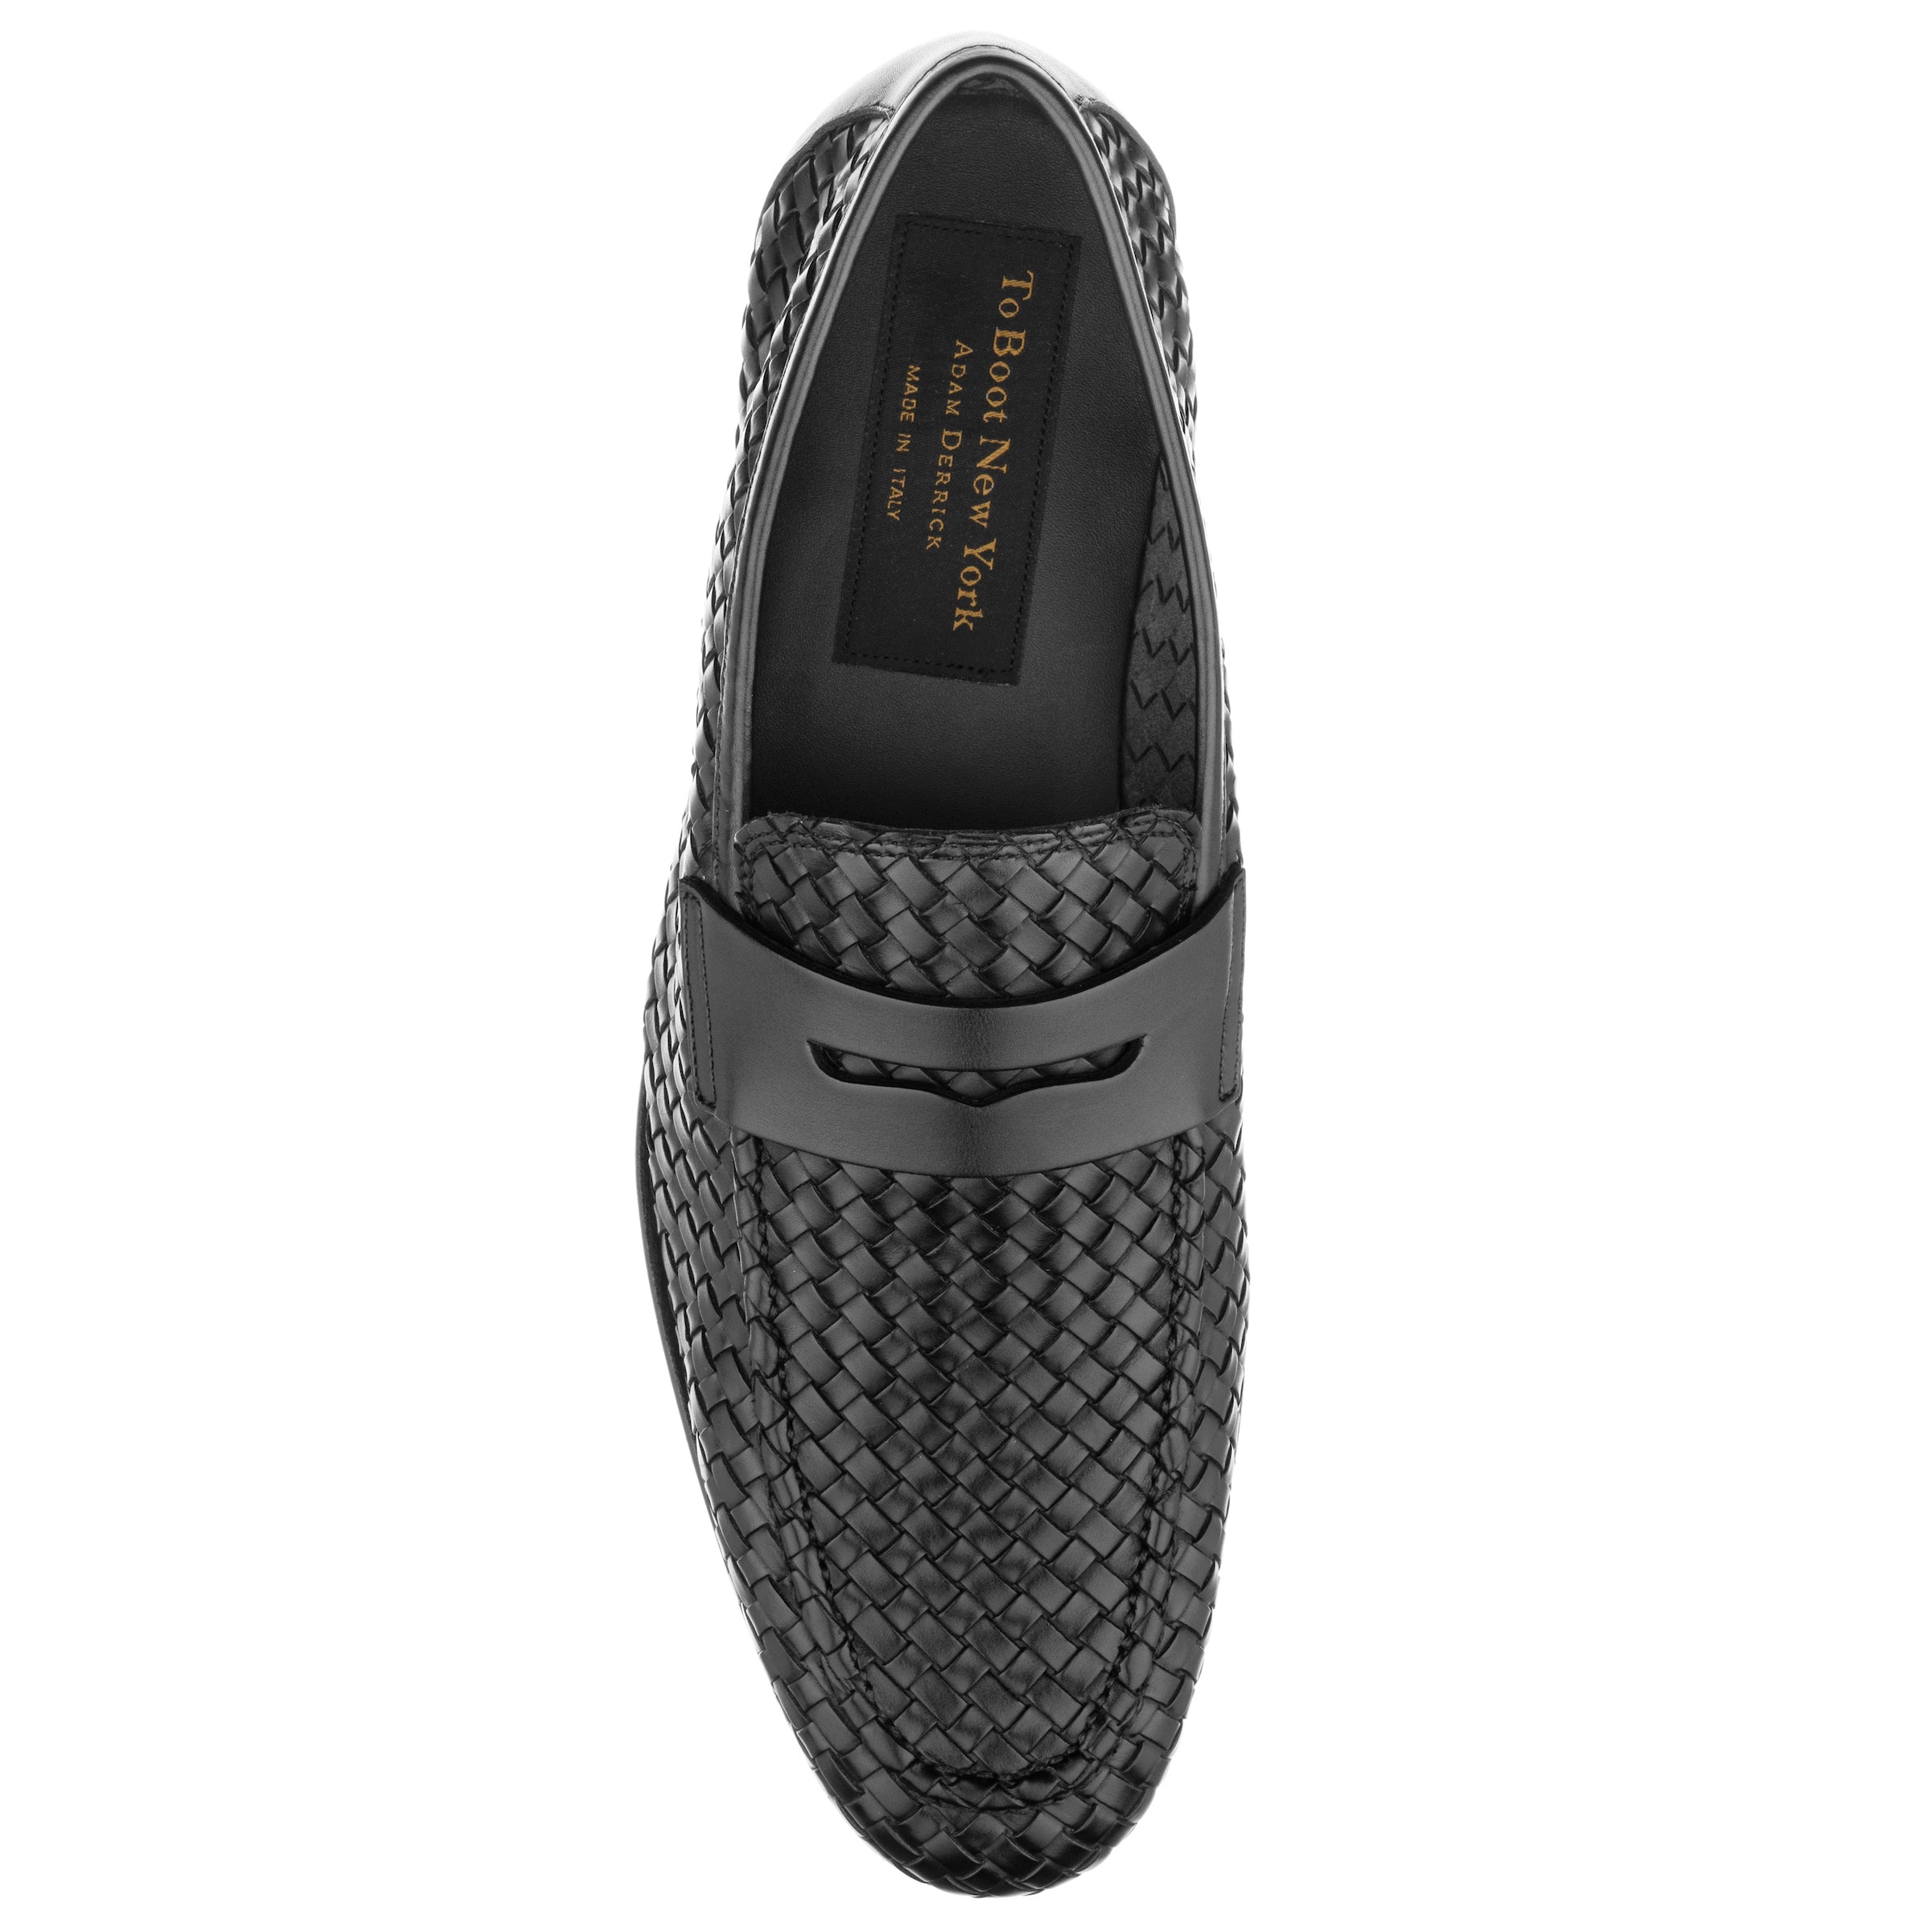 Zenith Black Woven Leather Loafer